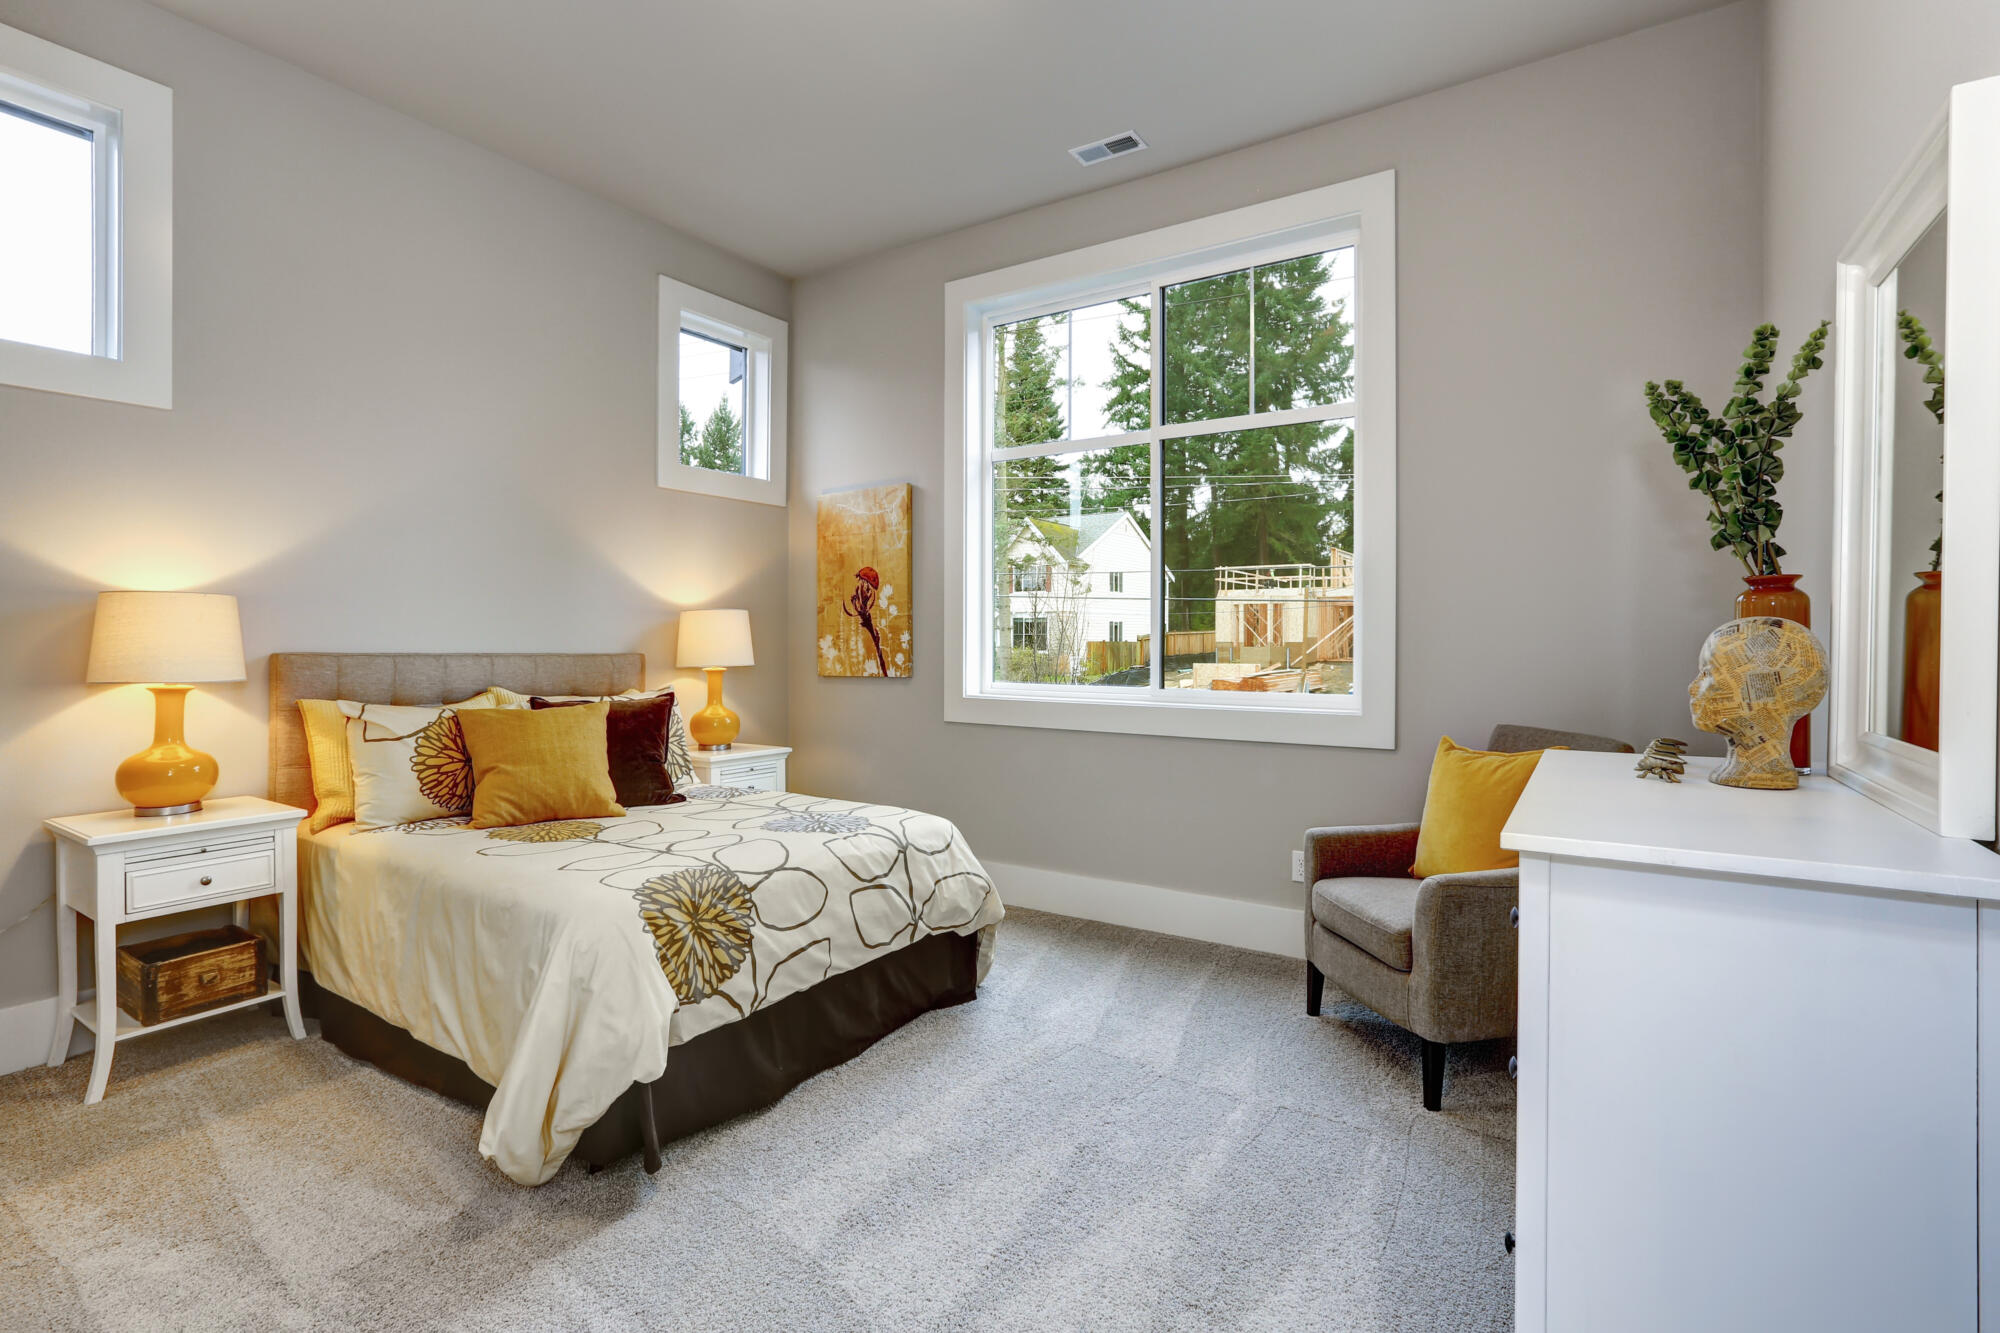 A guest bedroom with a bed, a dresser, and a window.